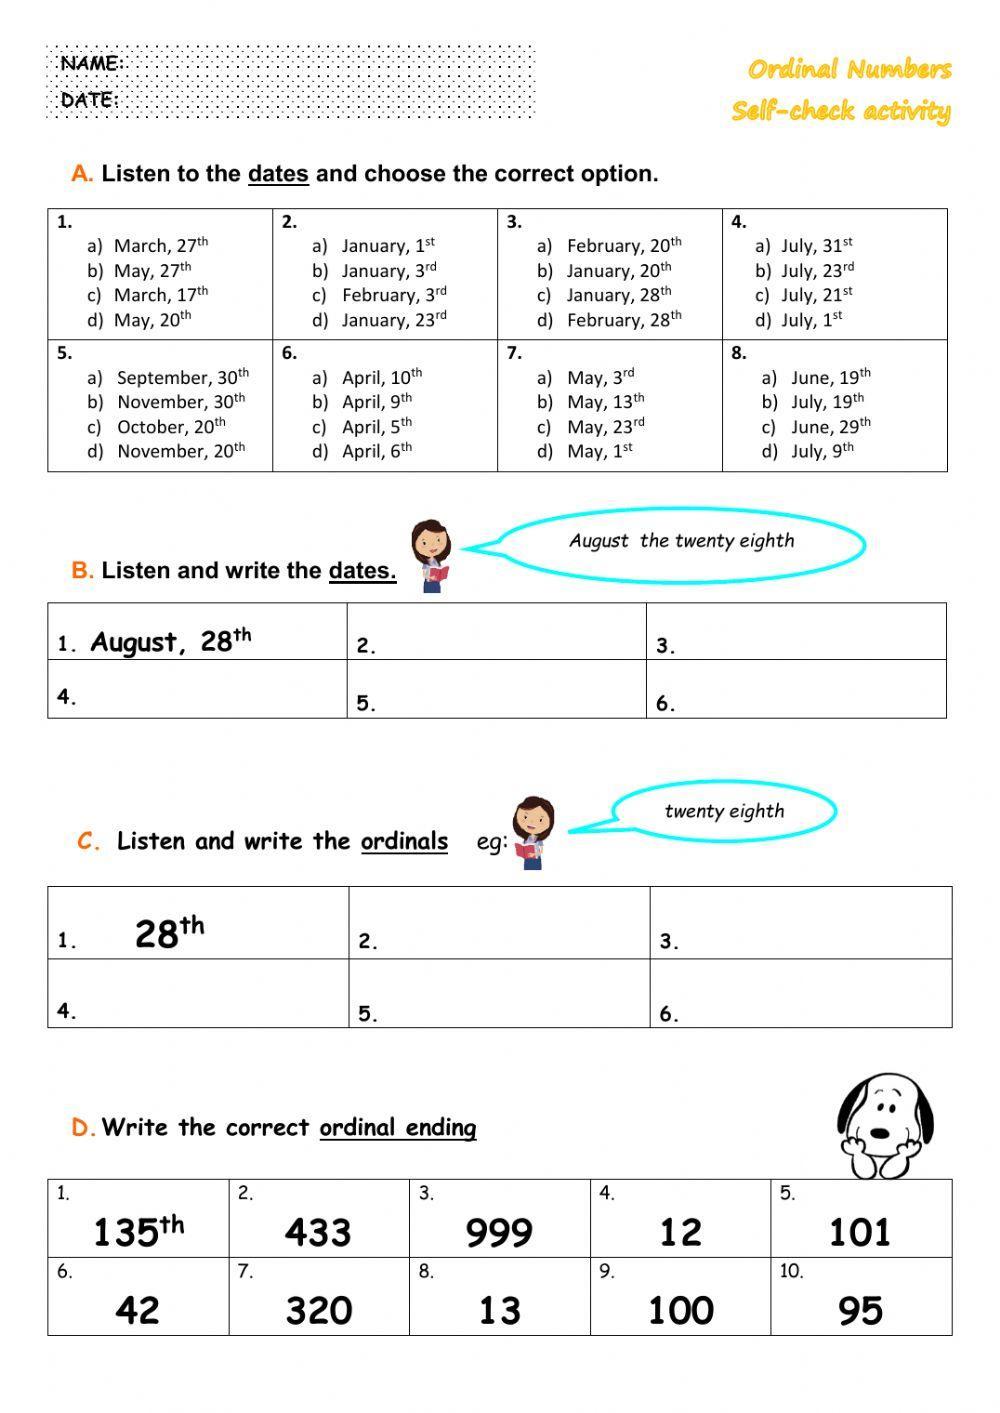 1st - Ordinal Numbers - Self-check A